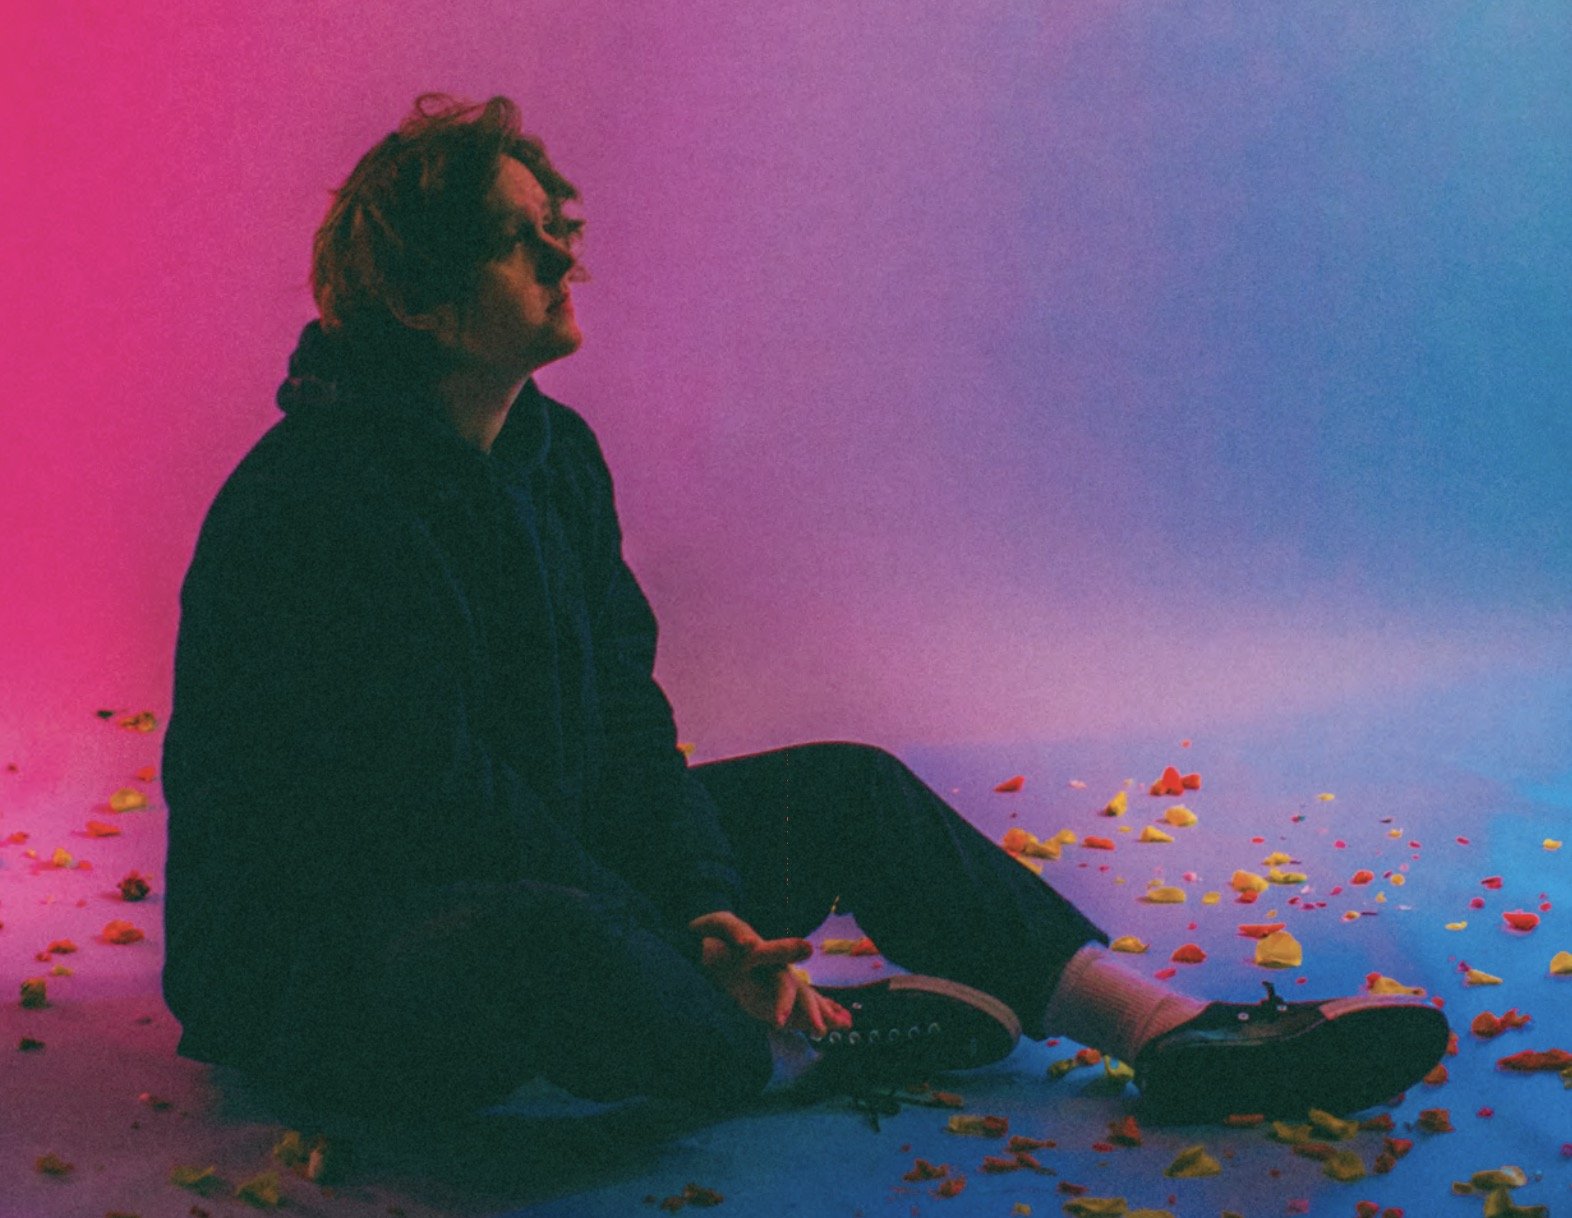 How Lewis Capaldi became a billion-stream superstar – according to his ...